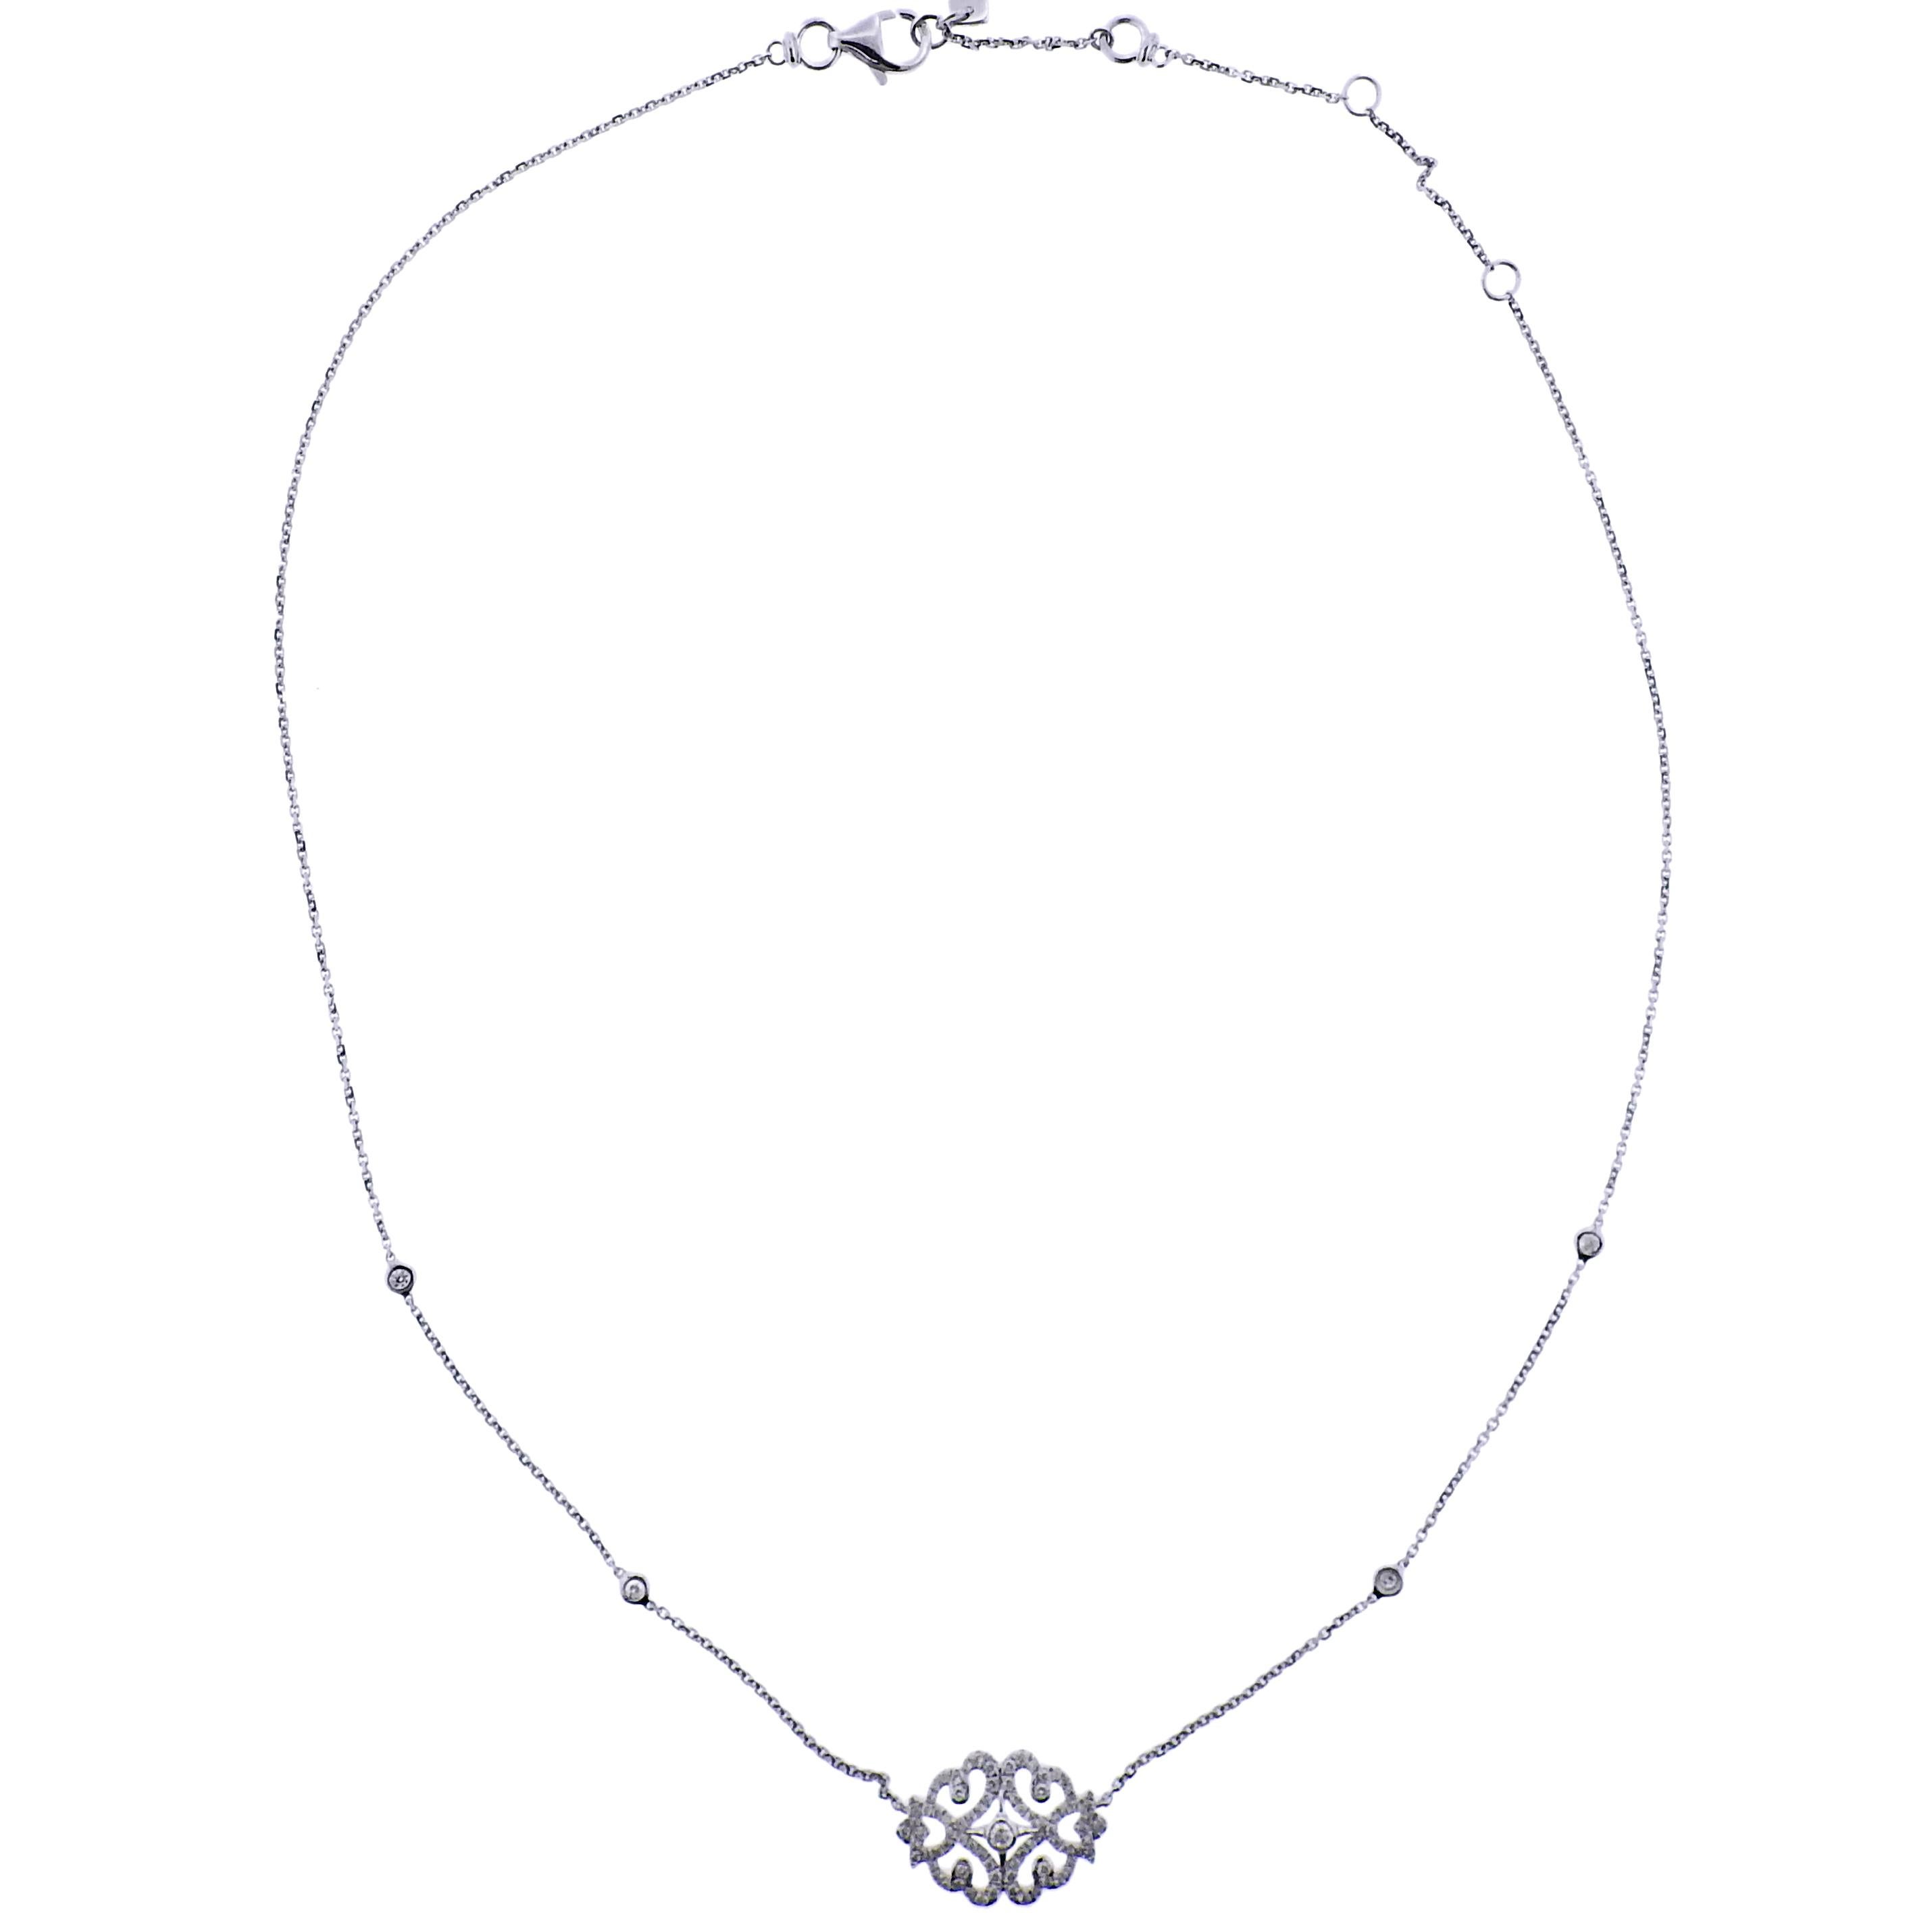 18k white gold Sultane necklace by Messika, with 0.38ctw G/VS diamonds. New, Store sample, with box. Retail $3444. Necklace is 14